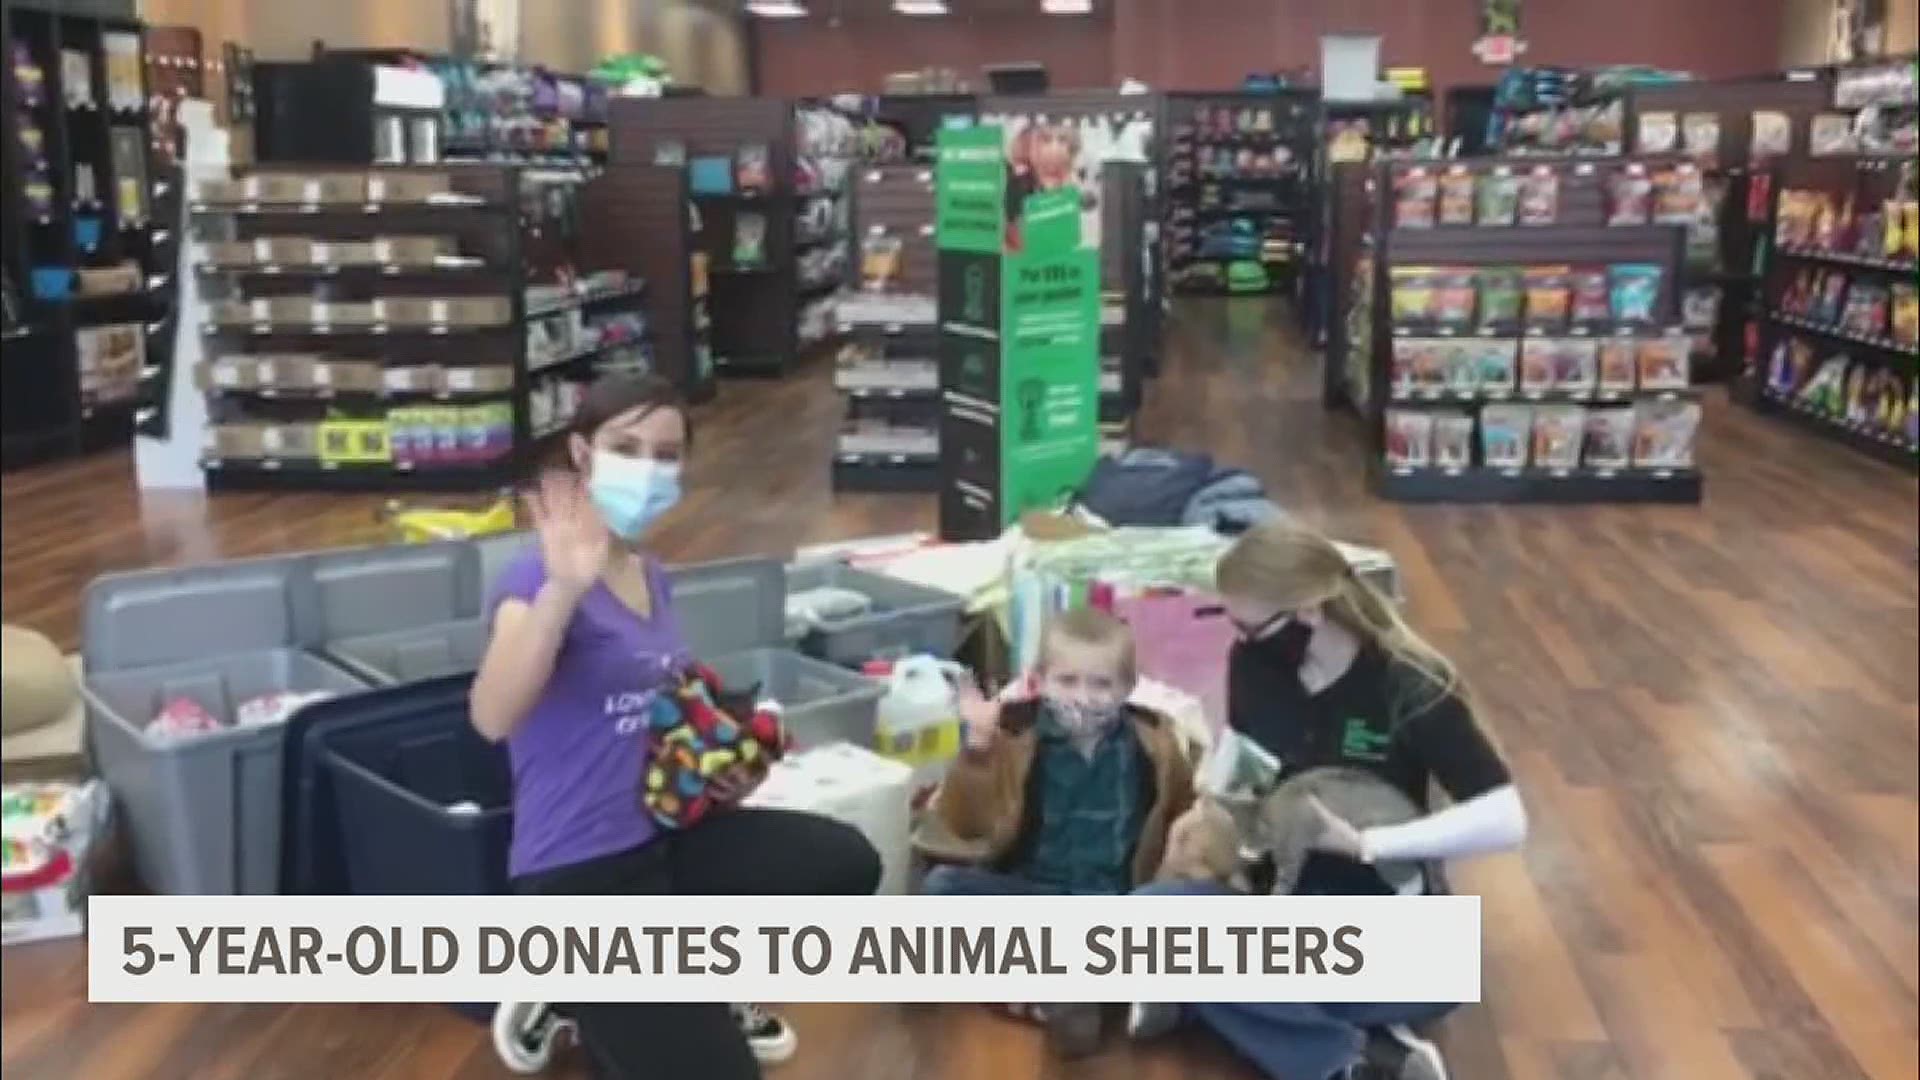 Draven gave up a traditional birthday celebration to help animals in need